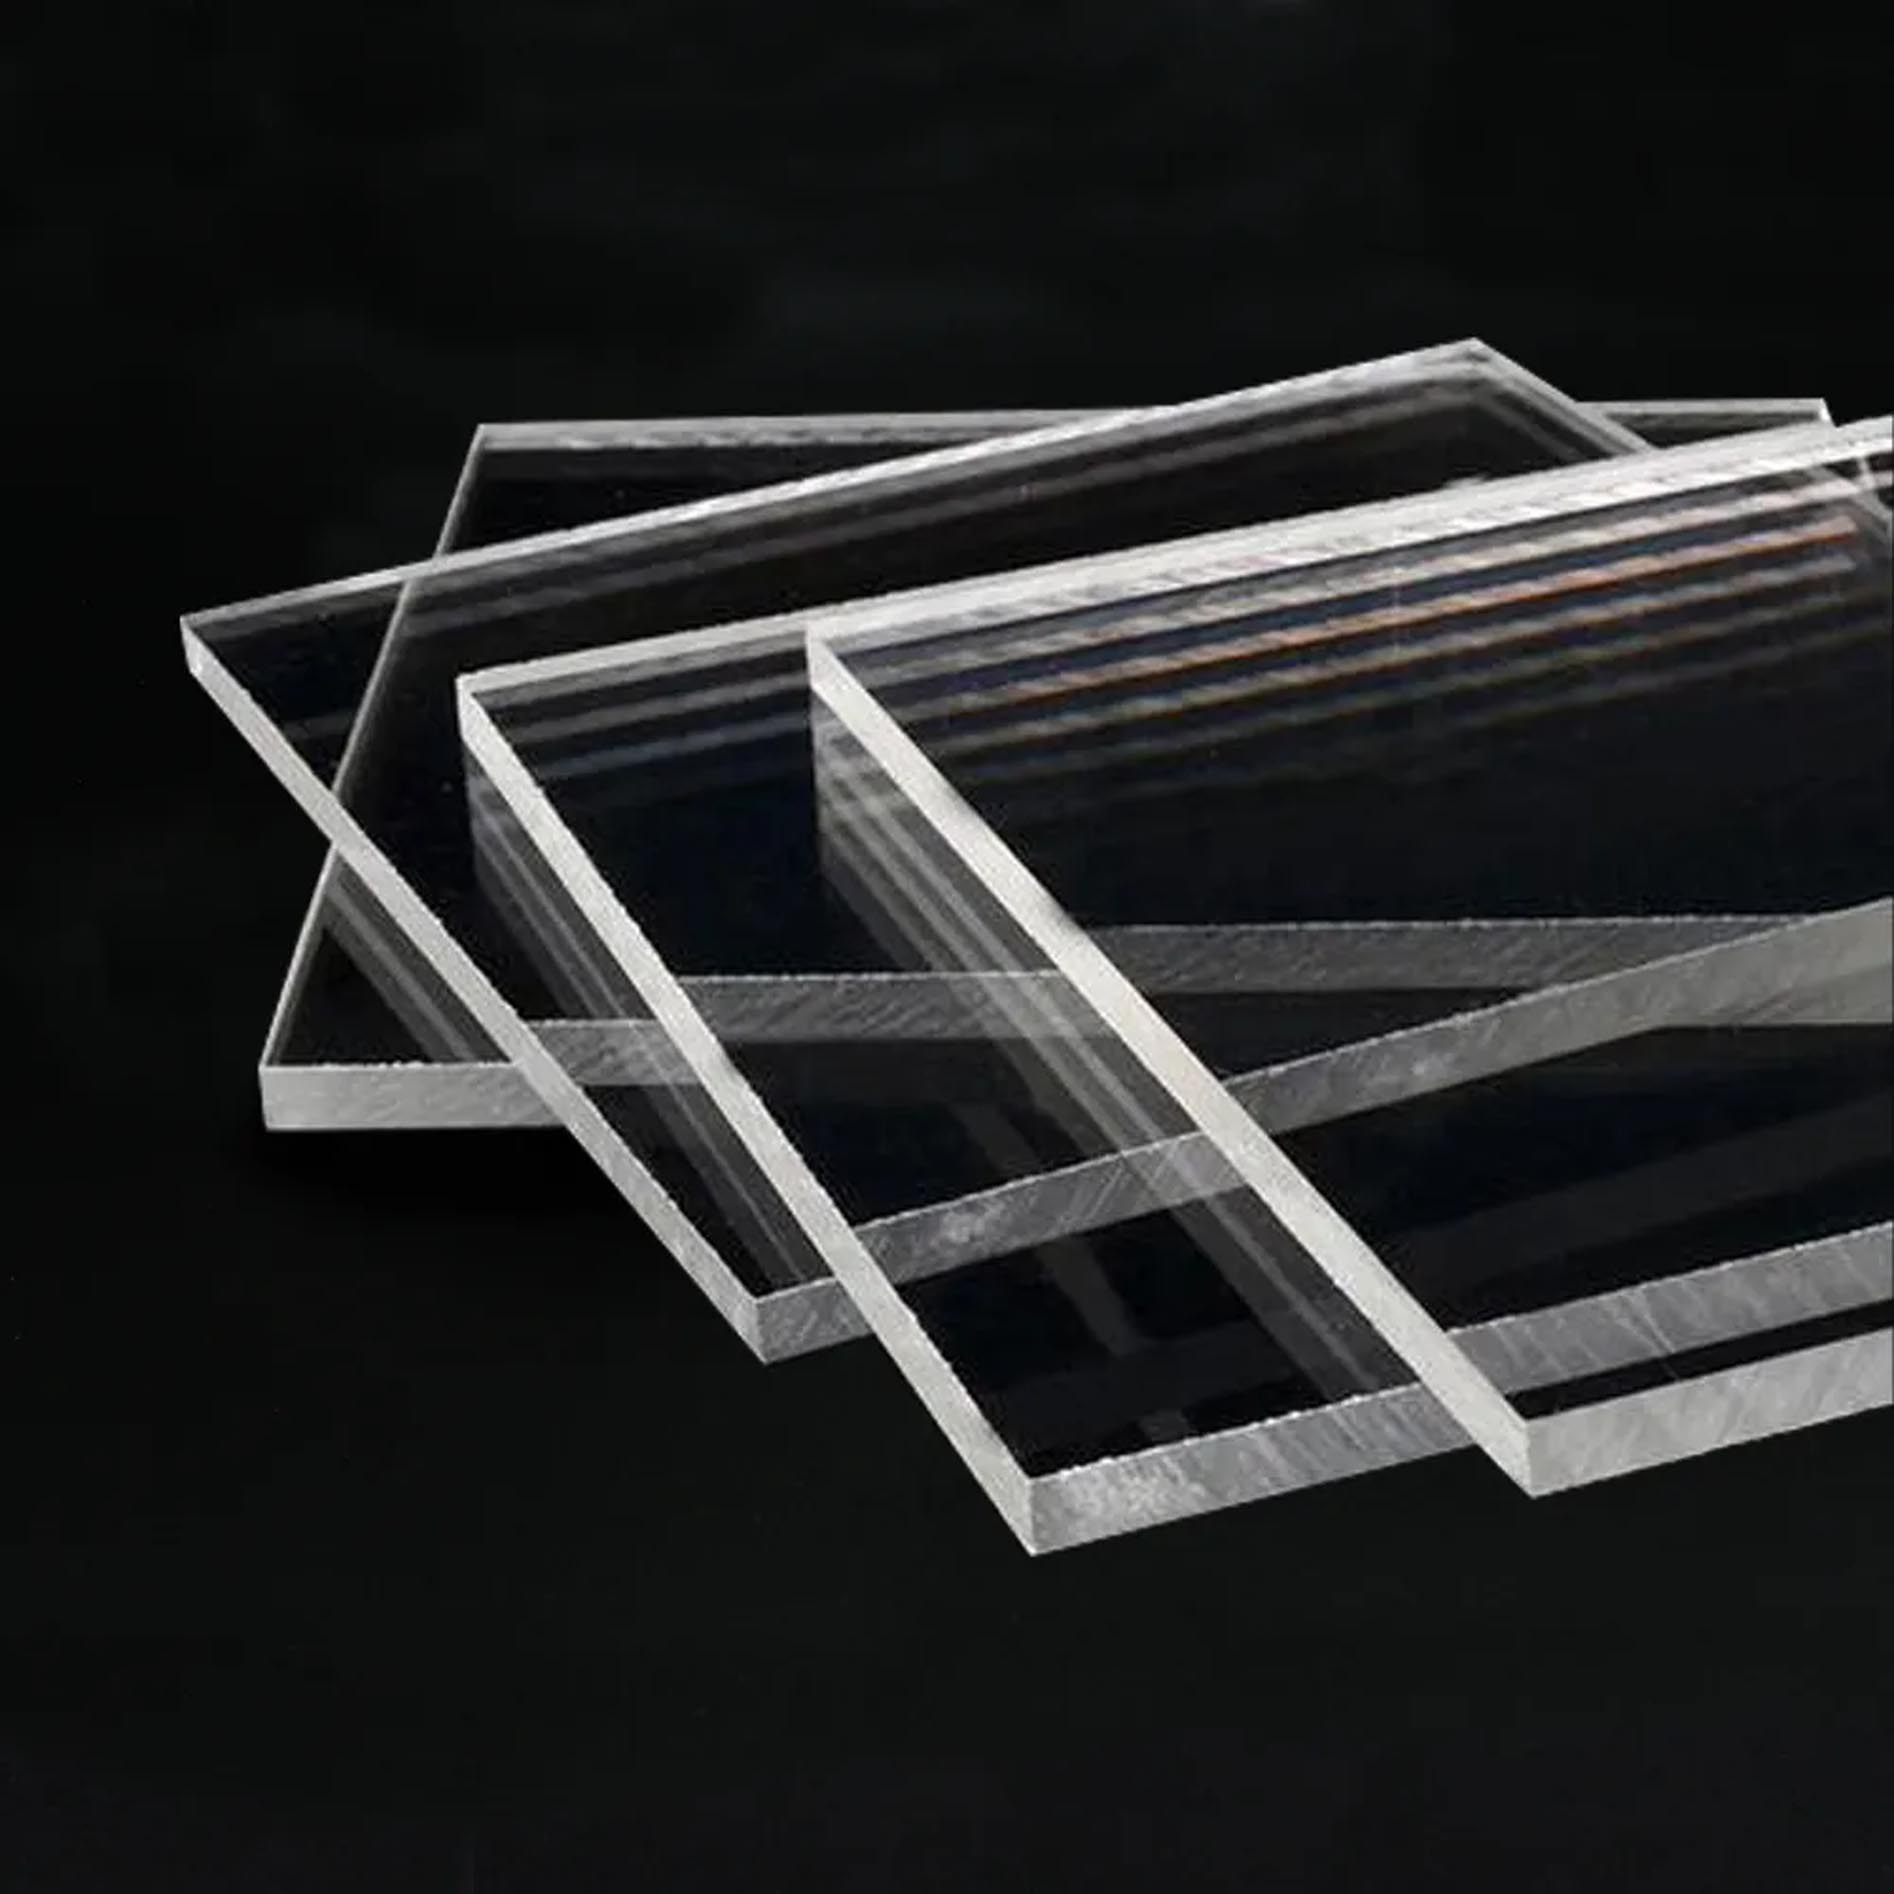 cast clear plexiglasses in a black surface